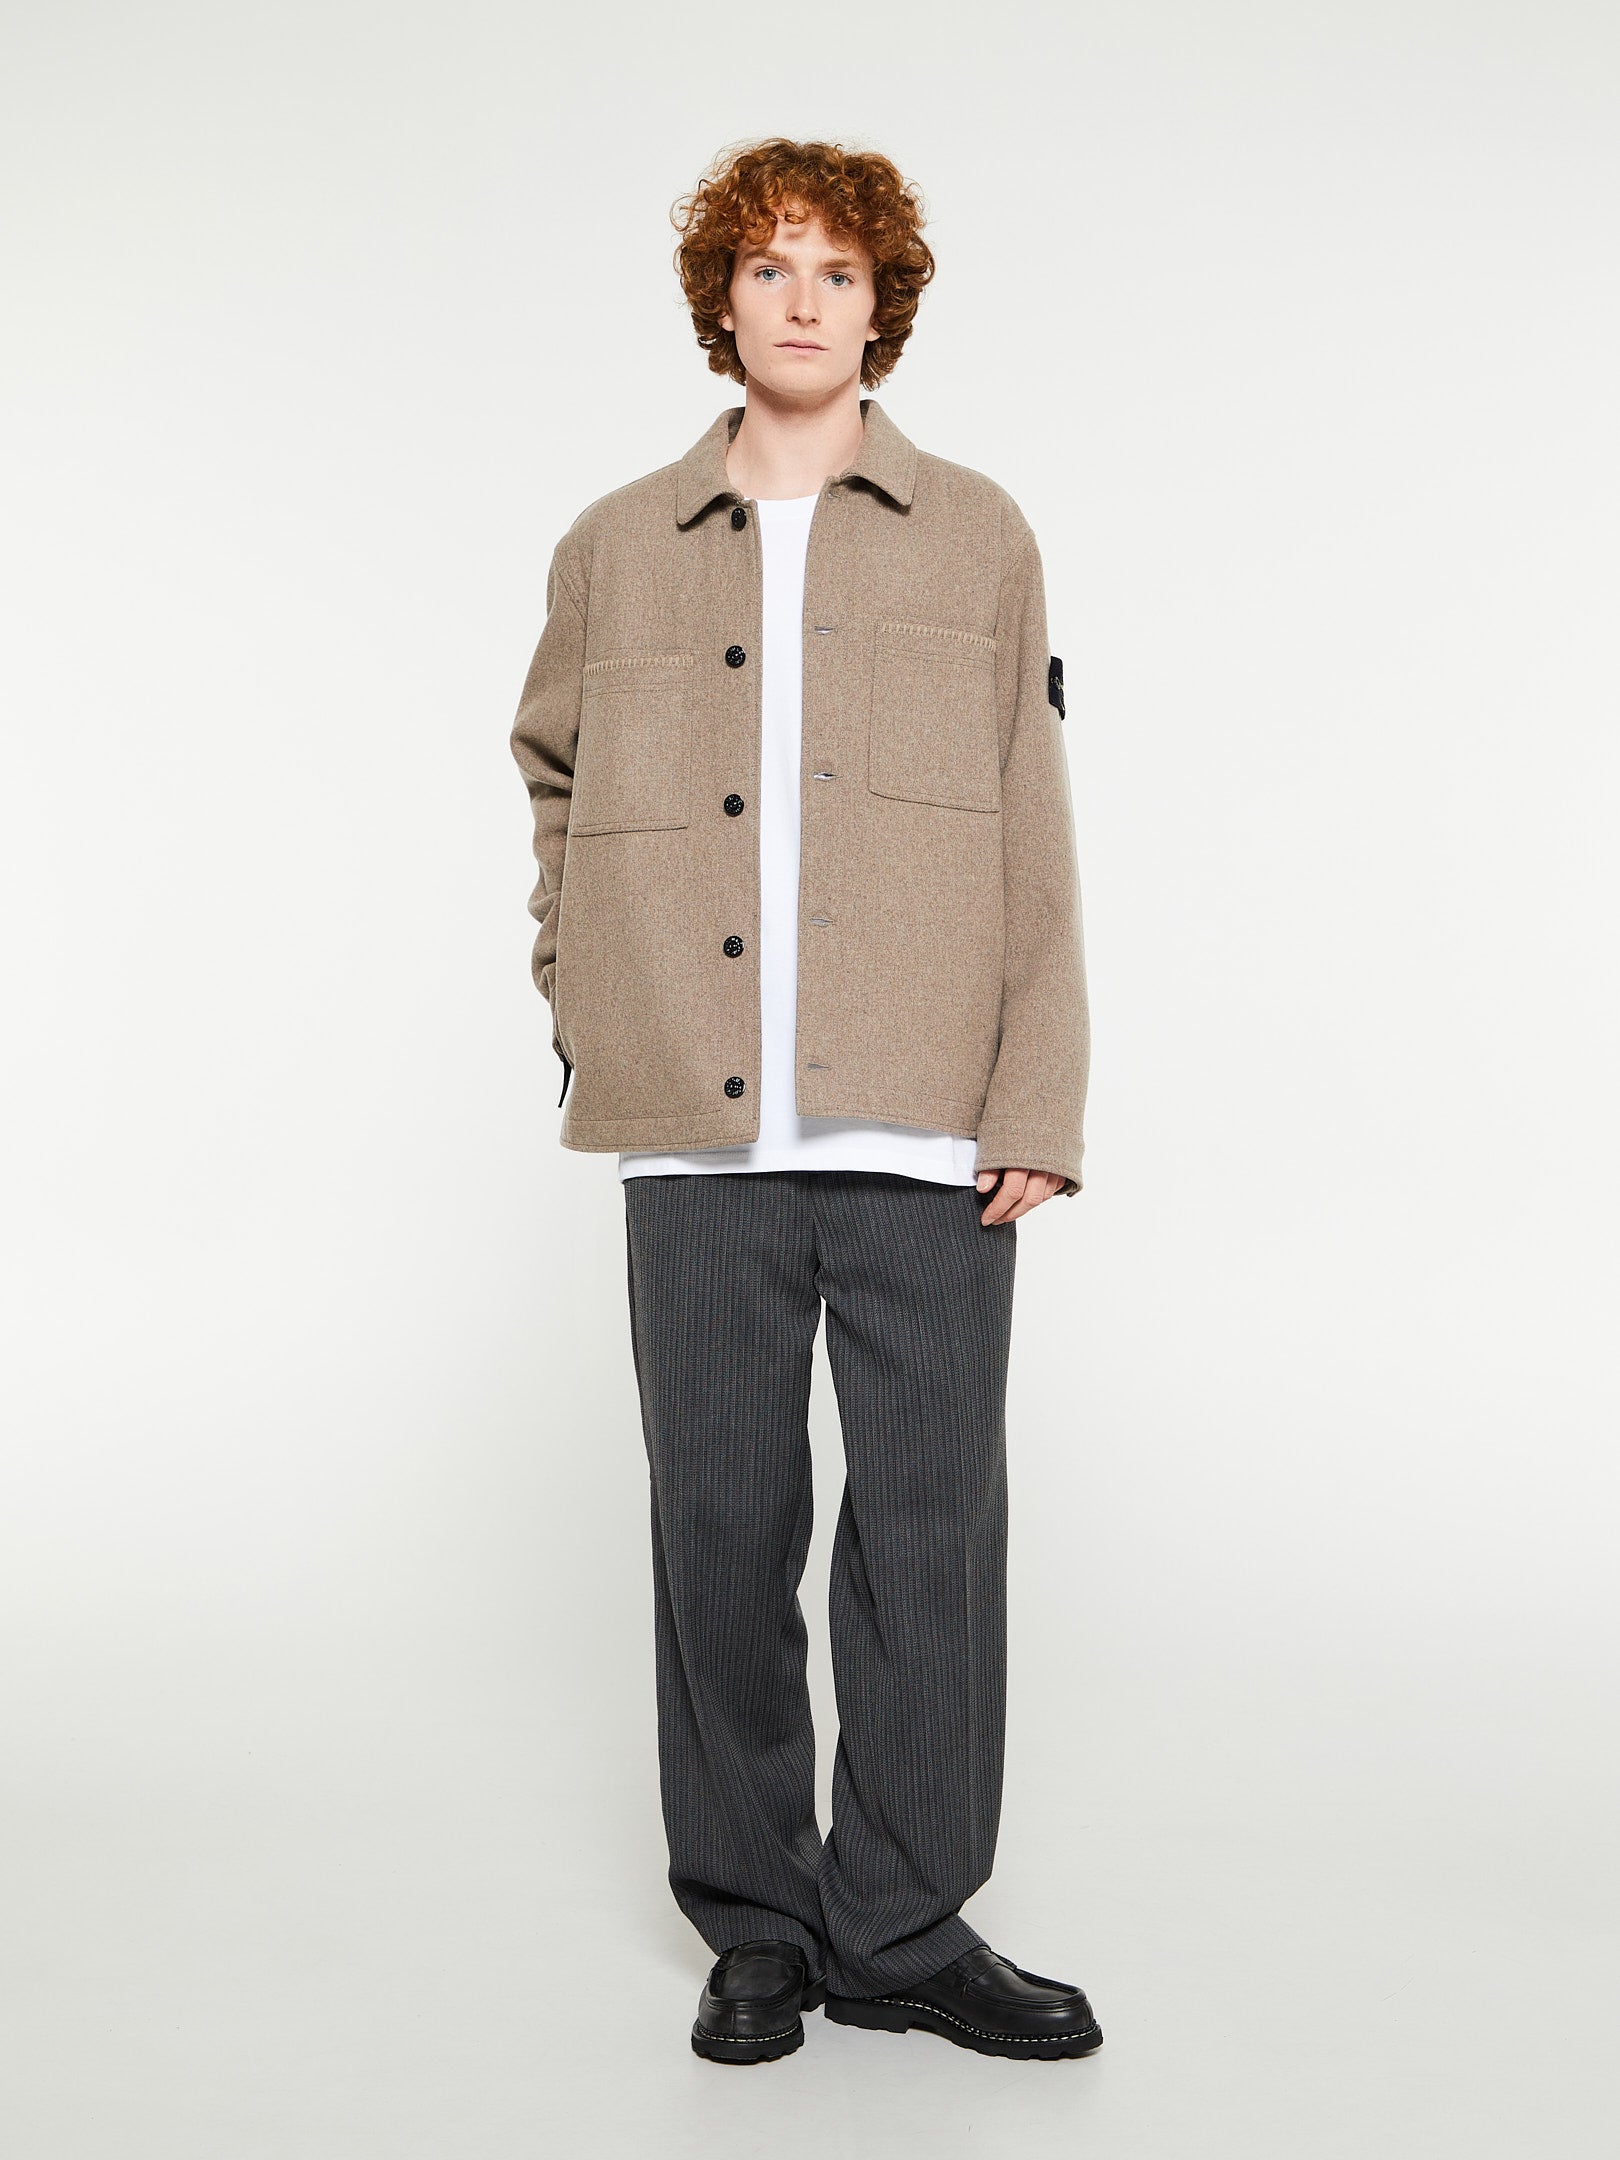 Q1030 Light Outerwear Jacket in Dove Grey